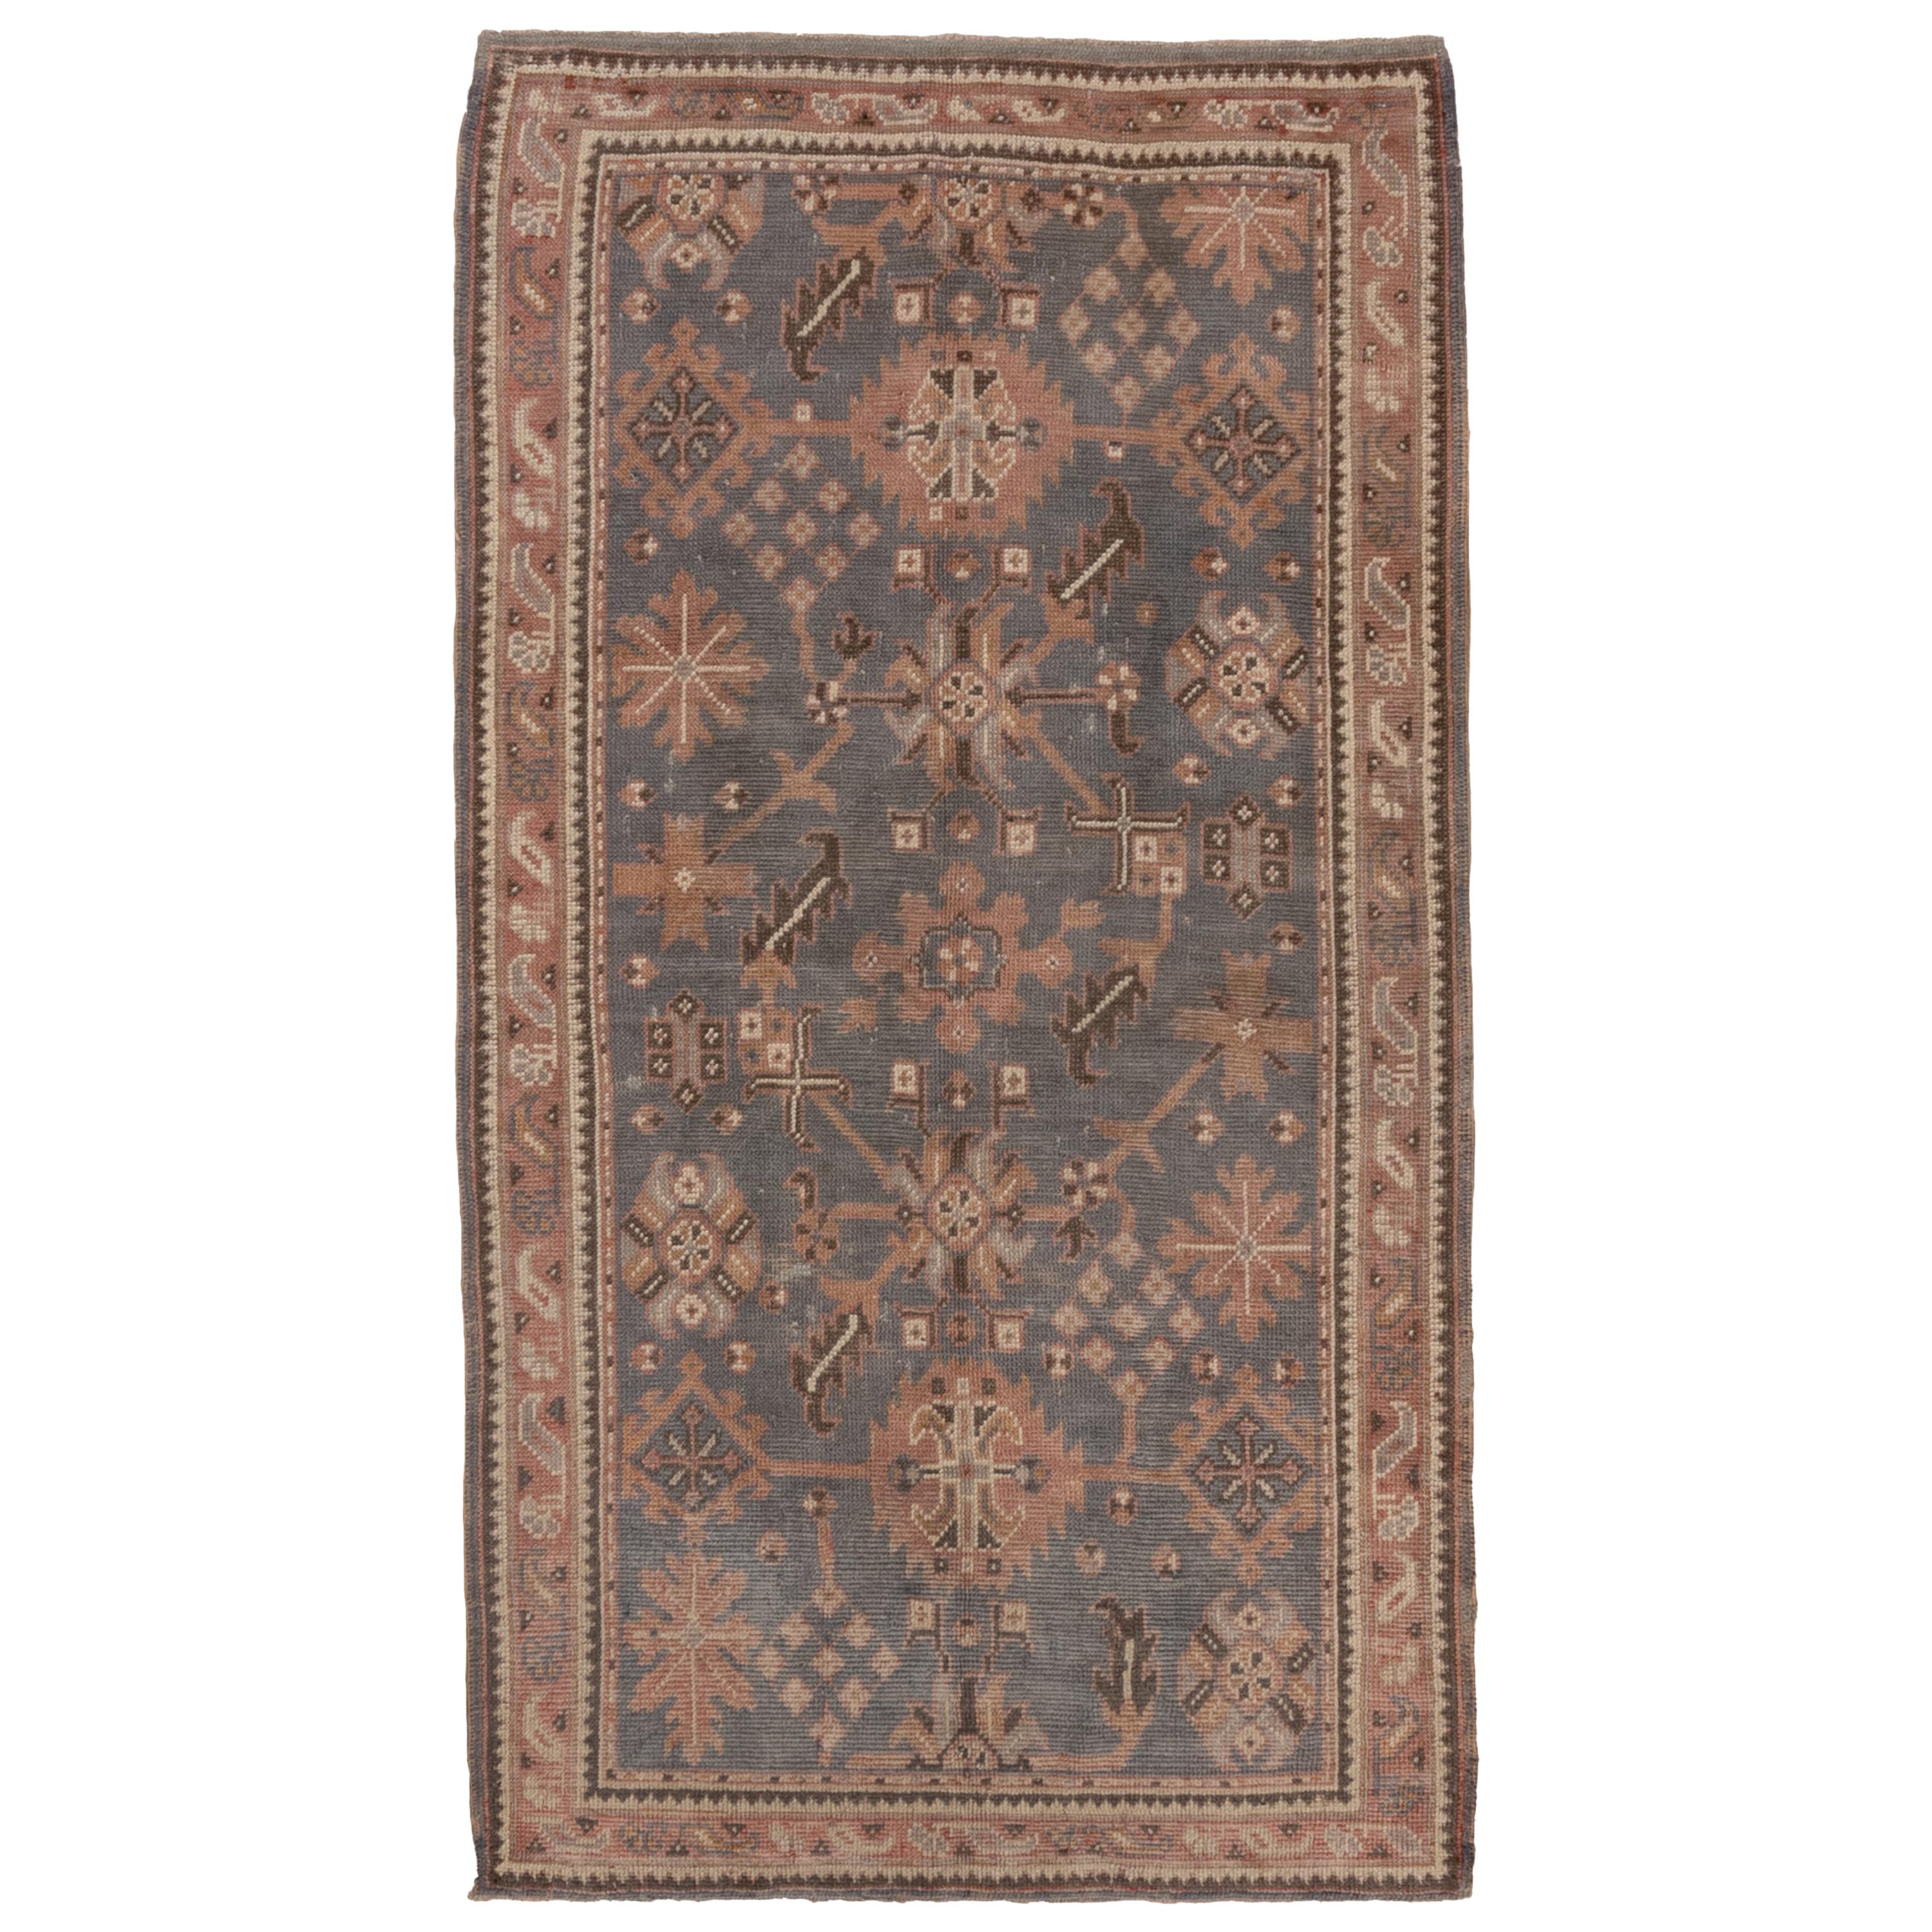 Antique Turkish Oushak Rug, Dark Gray All-Over Field, Coral Borders, circa 1920s